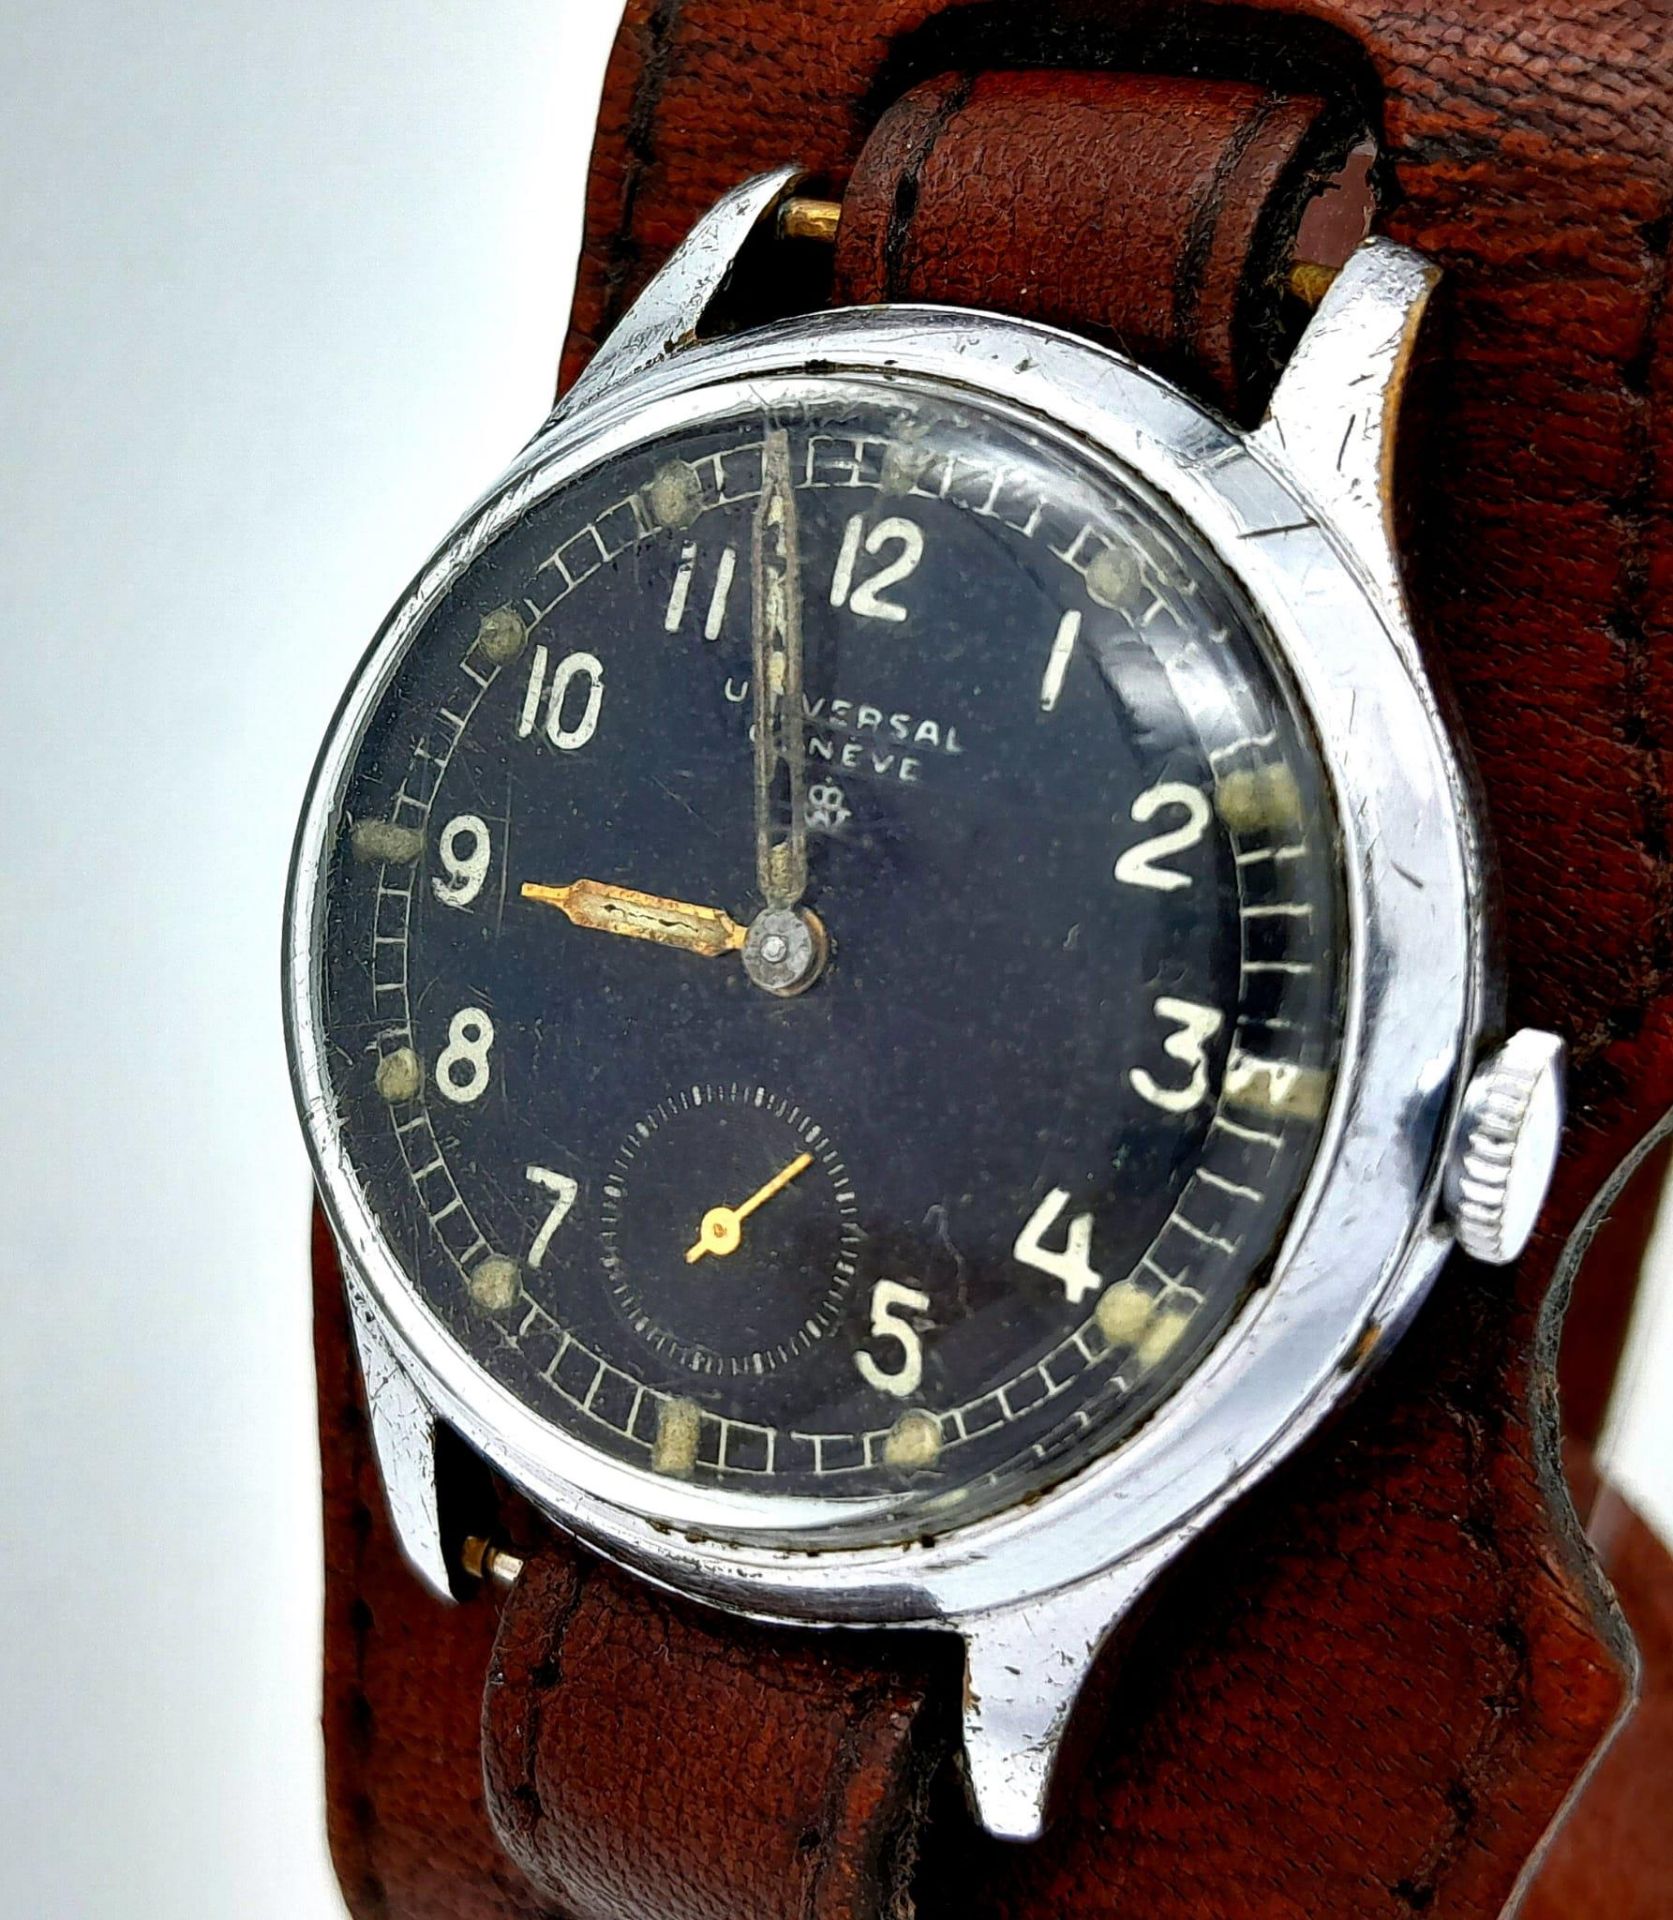 A Rare Vintage Universal Geneve Mechanical Gents Watch. Double leather strap. Stainless steel case - - Image 3 of 4